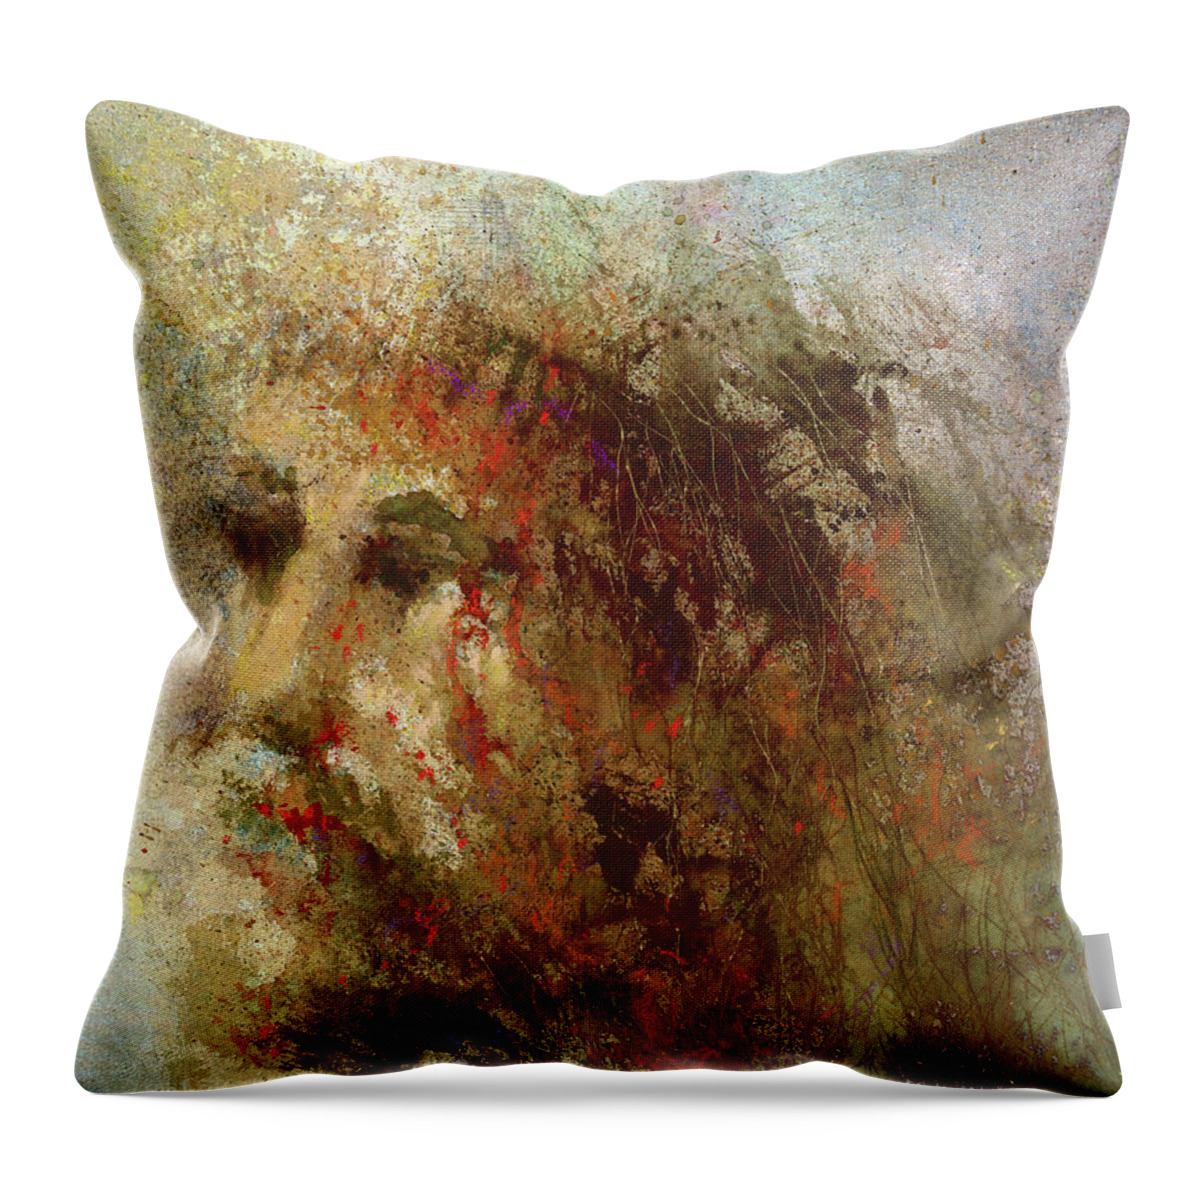 Religious Throw Pillow featuring the painting The Lamb by Andrew King